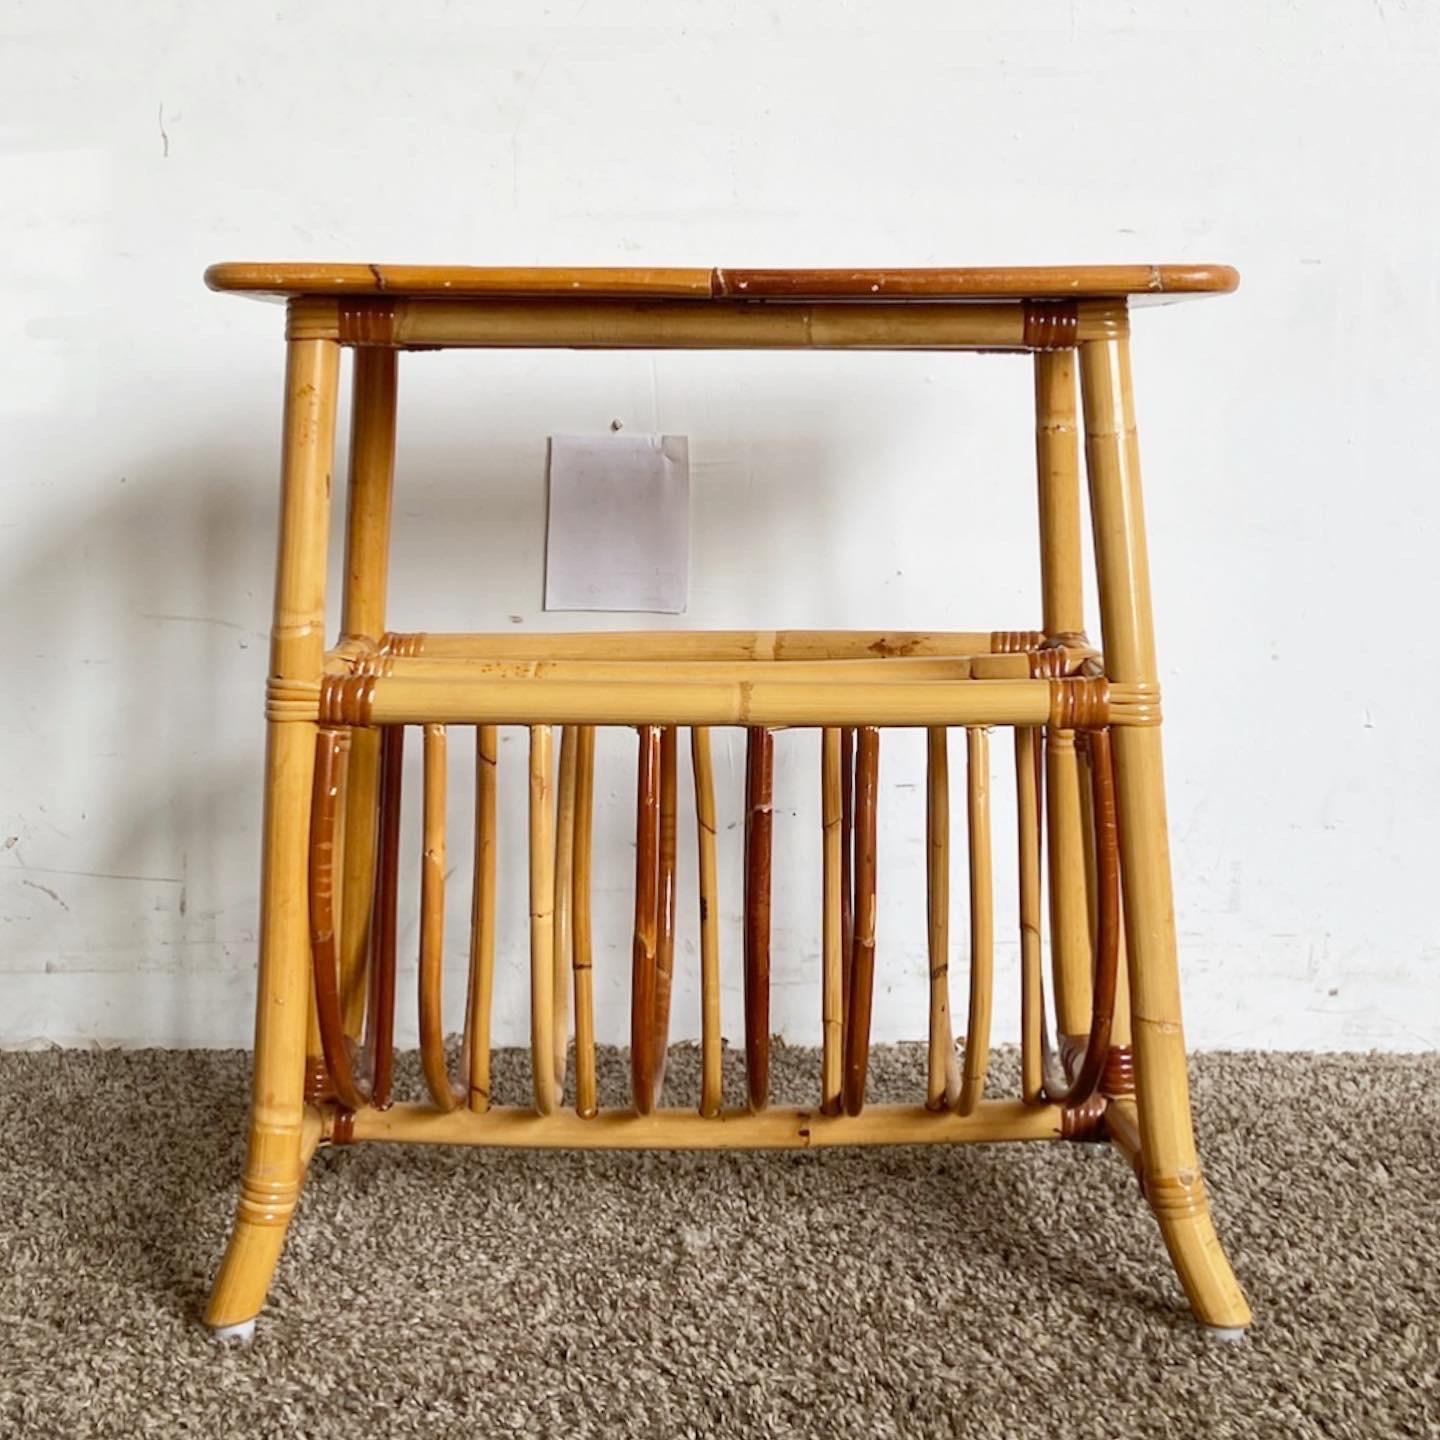 Infuse your home with Boho Chic Bamboo Magazine Rack Side Table. A versatile piece that stylishly combines convenient storage and surface space.
Minor wear around the edges as seen in the photos.